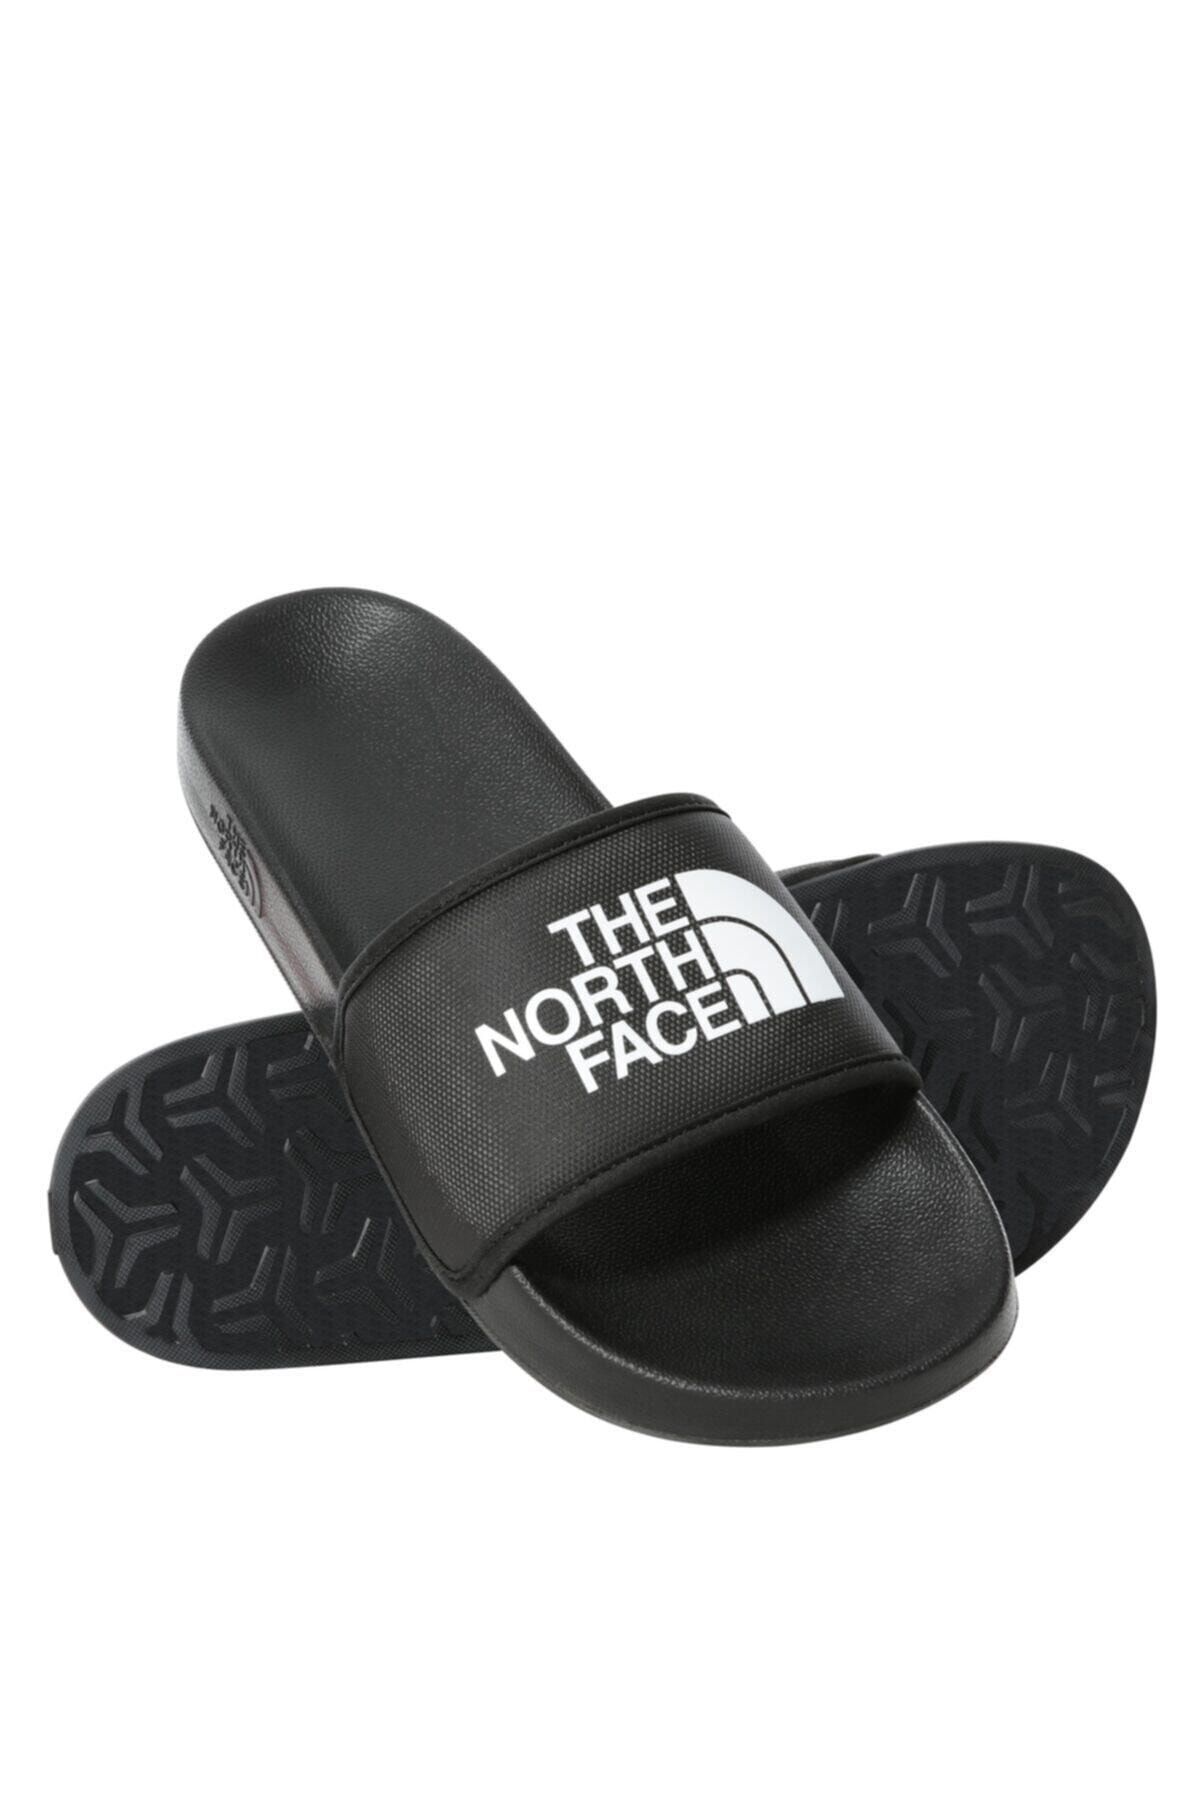 The North Face Slipper Black M Base Camp Slide III NF0A4T2RKY41